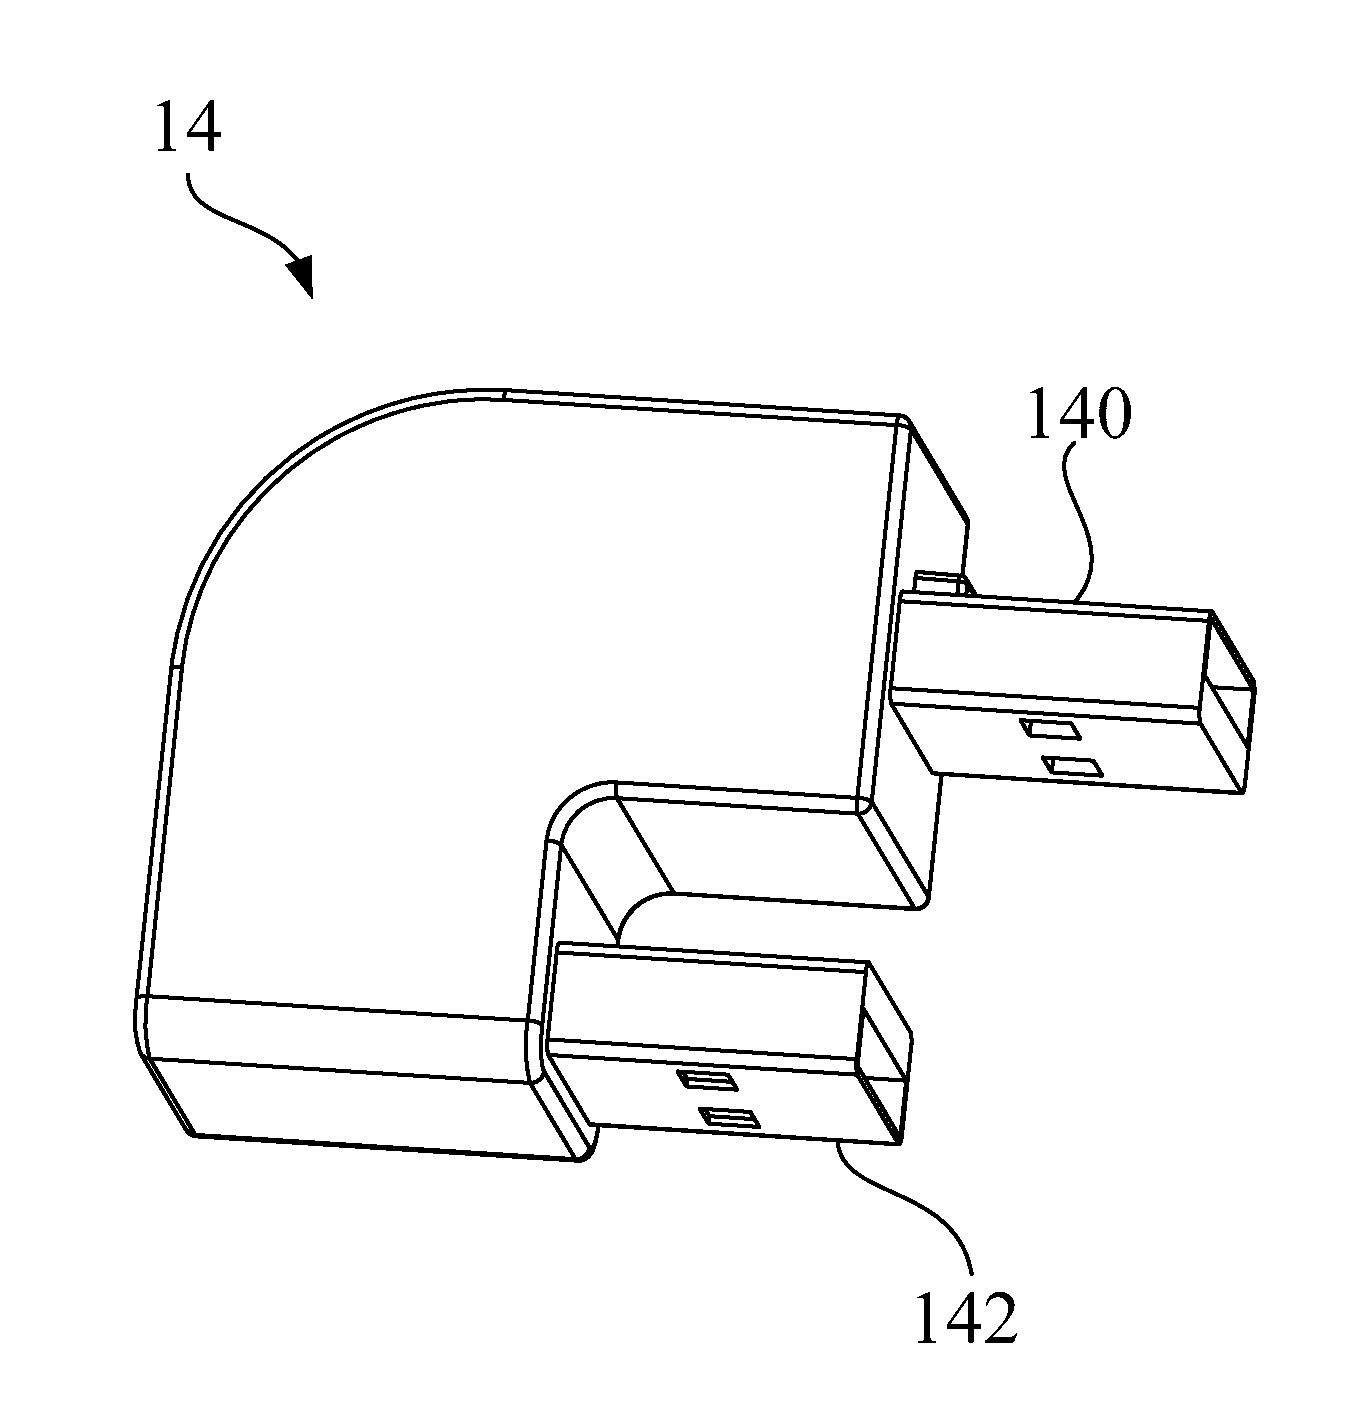 Expandable computer system and fastening device thereof